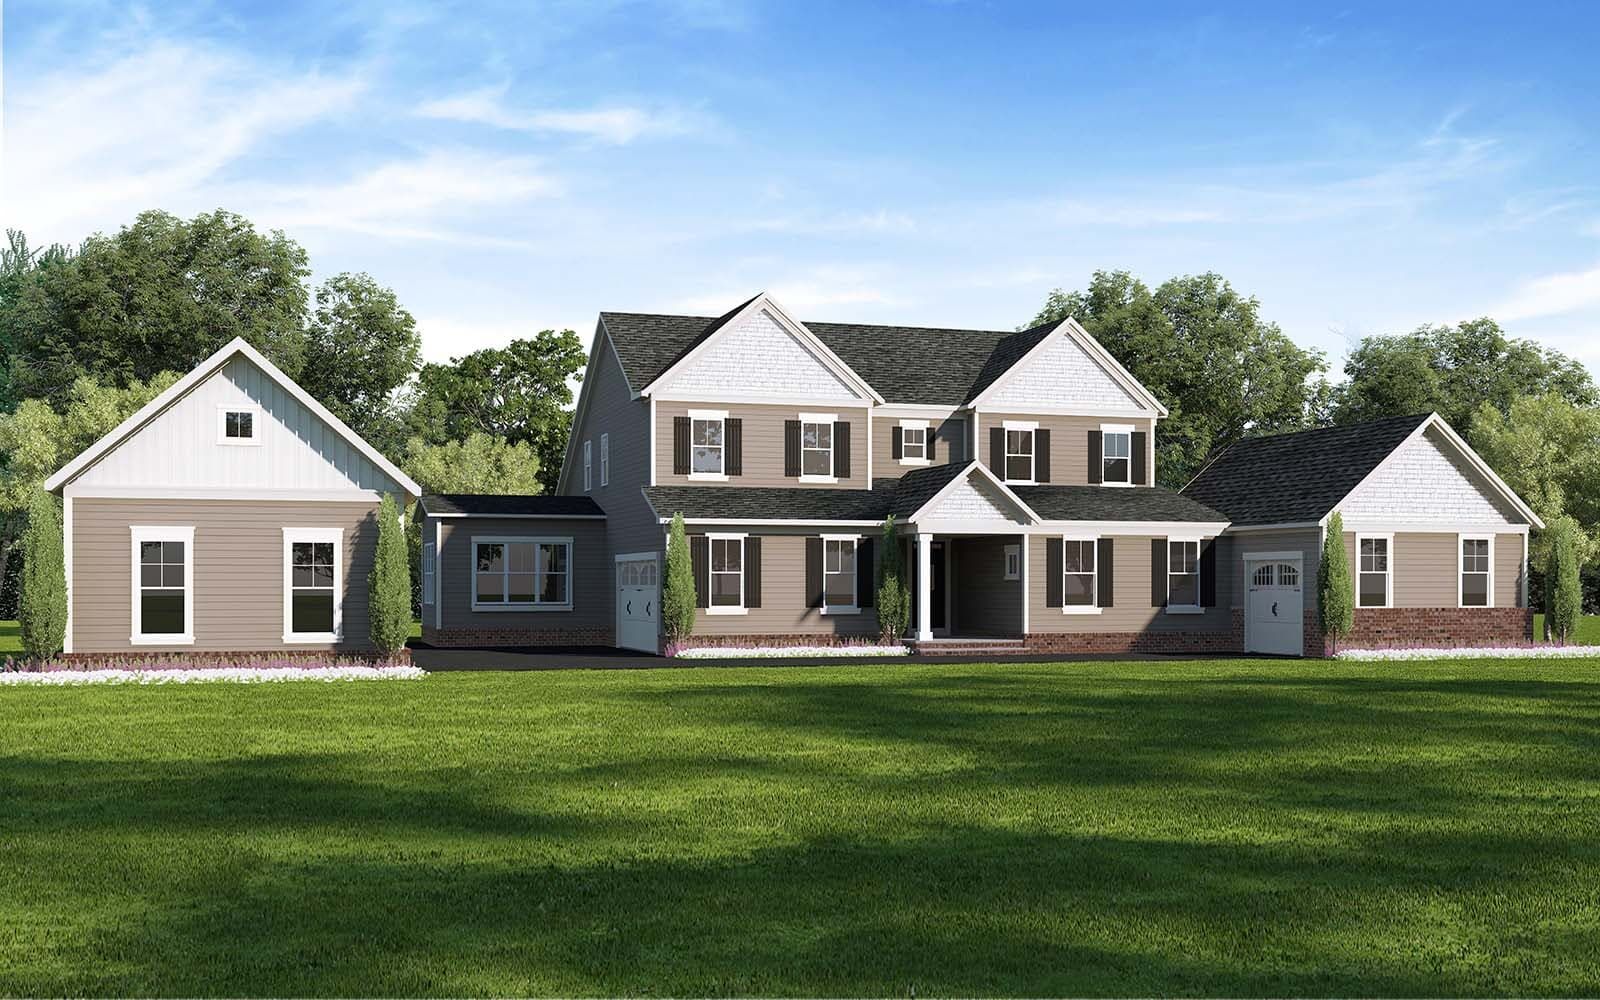 Elevation 2:A rendering of the Weymouth elevation 2 at Waterford Manor by Brookfield Residential